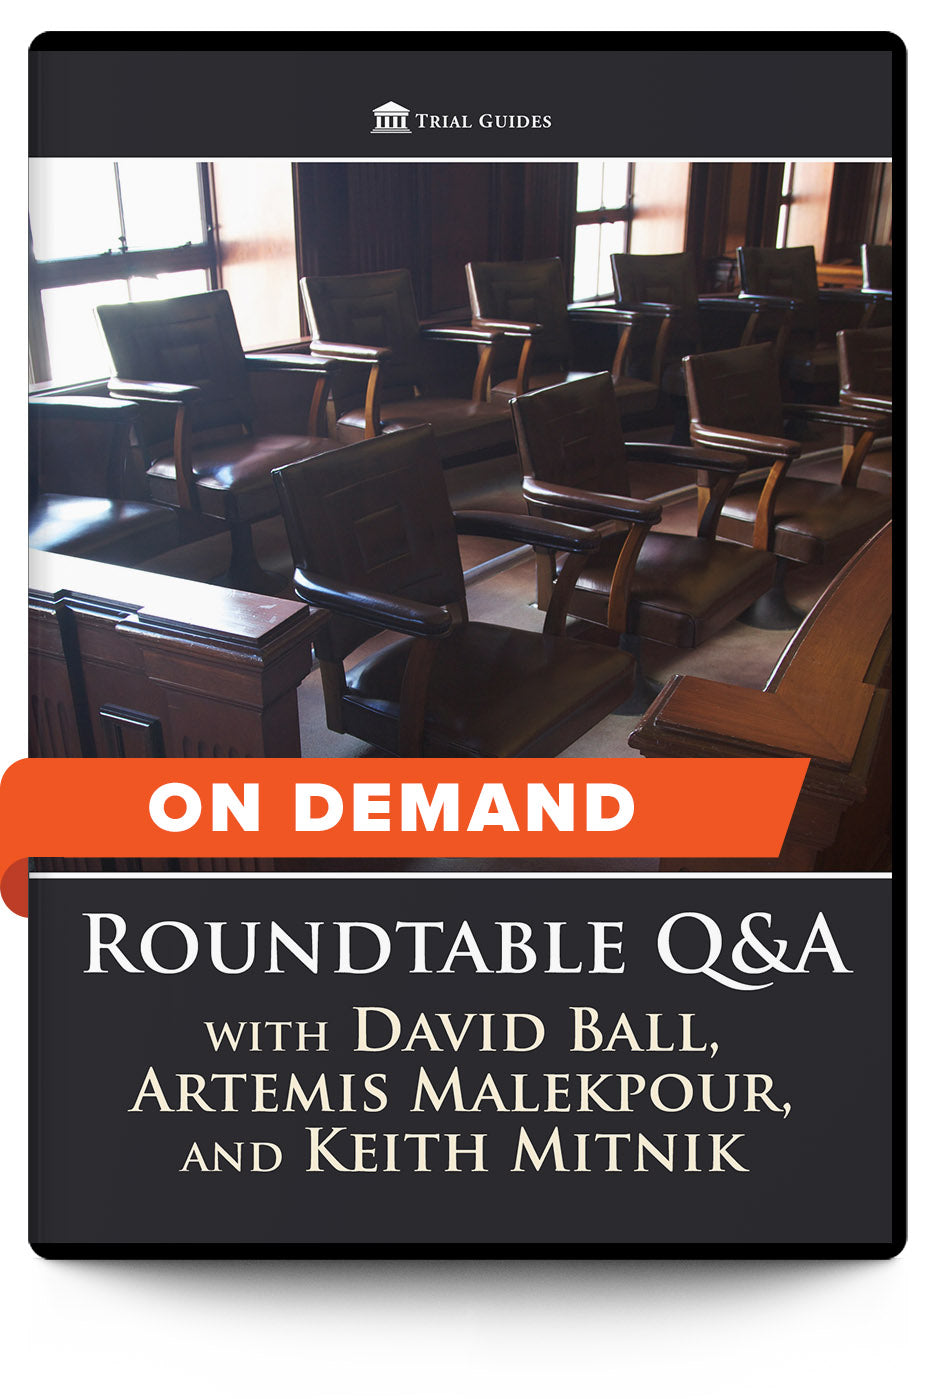 Roundtable Q&A with David Ball, Artemis Malekpour, and Keith Mitnik